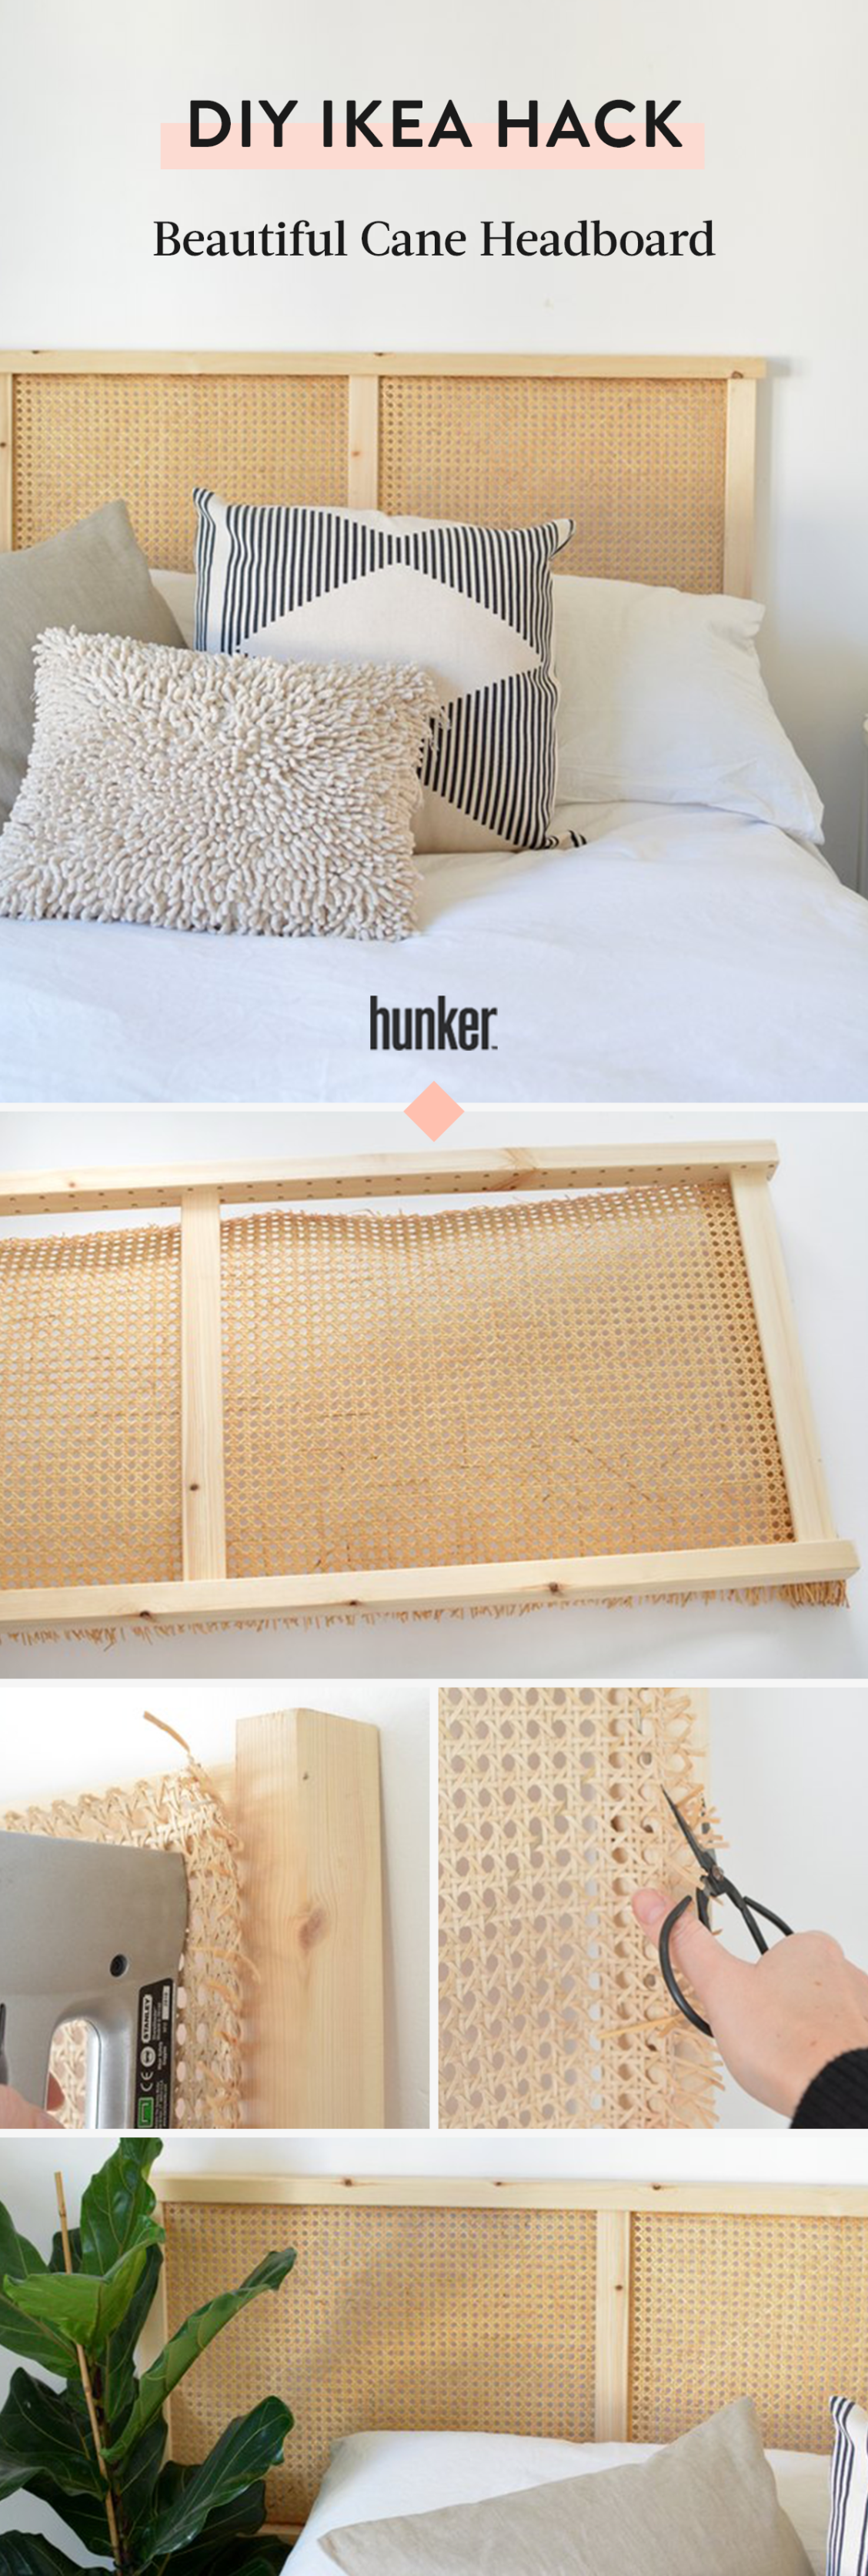 This Utilitarian IKEA Piece Gets Transformed Into a Beautiful Cane Headboard | Hunker - This Utilitarian IKEA Piece Gets Transformed Into a Beautiful Cane Headboard | Hunker -   19 diy Headboard ikea ideas